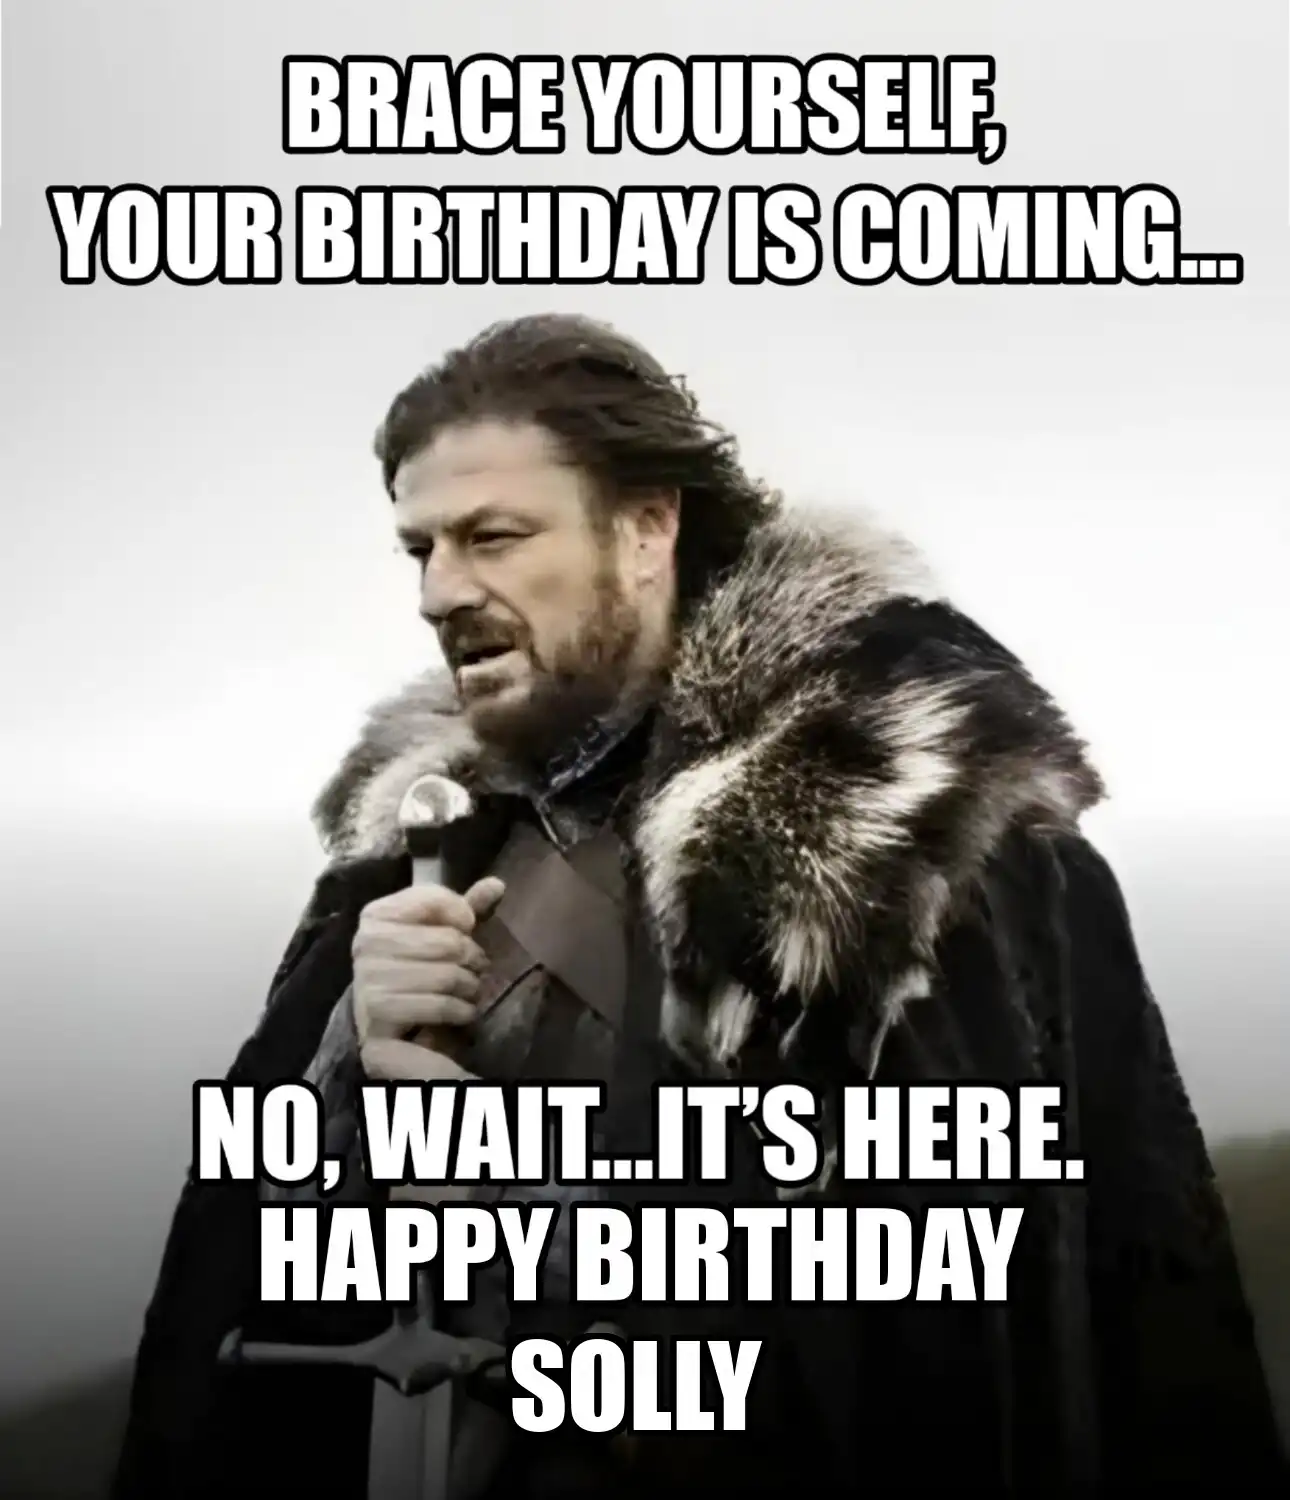 Happy Birthday Solly Brace Yourself Your Birthday Is Coming Meme